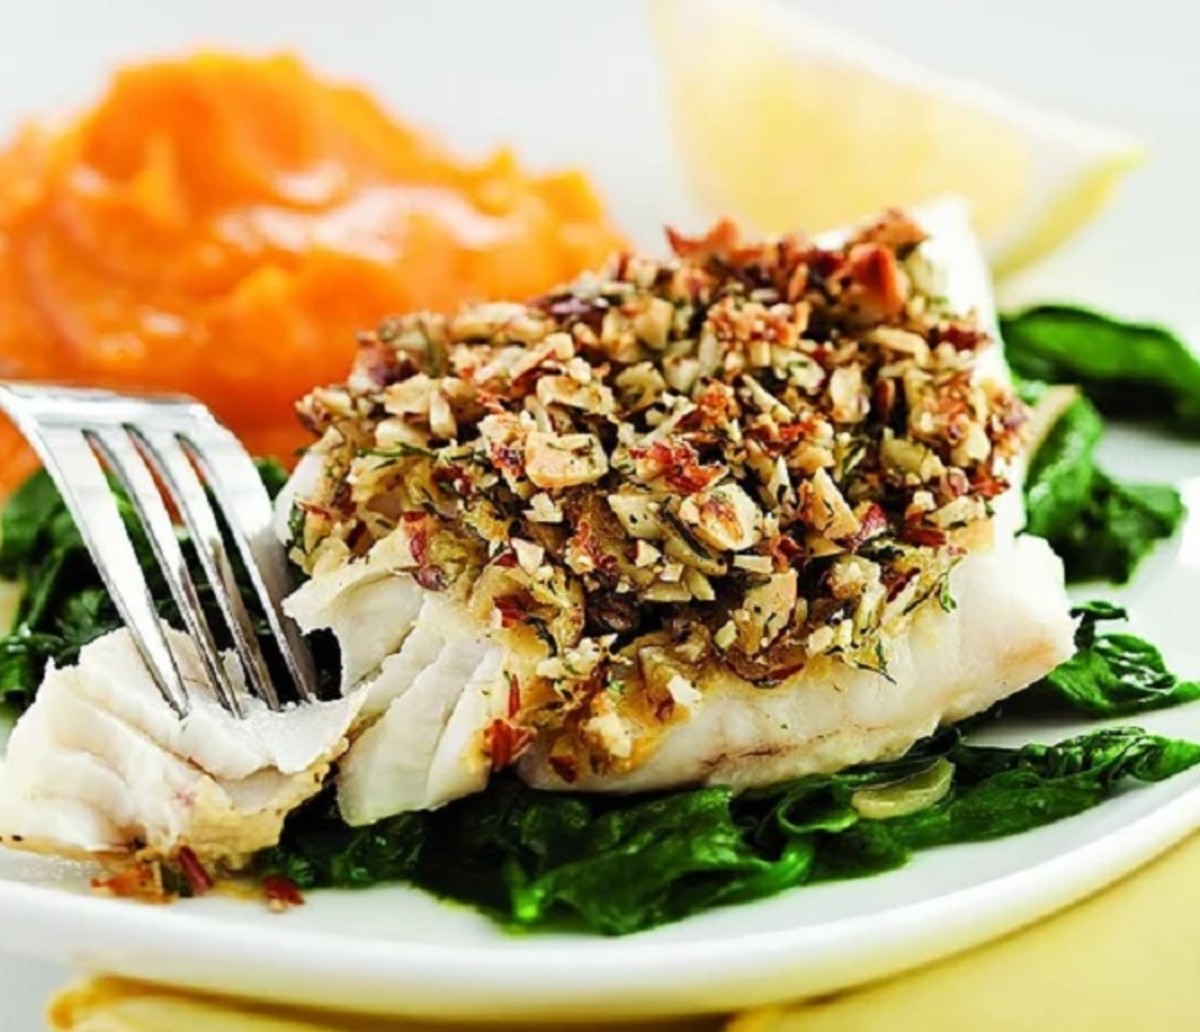 Almond and lemon crusted fish